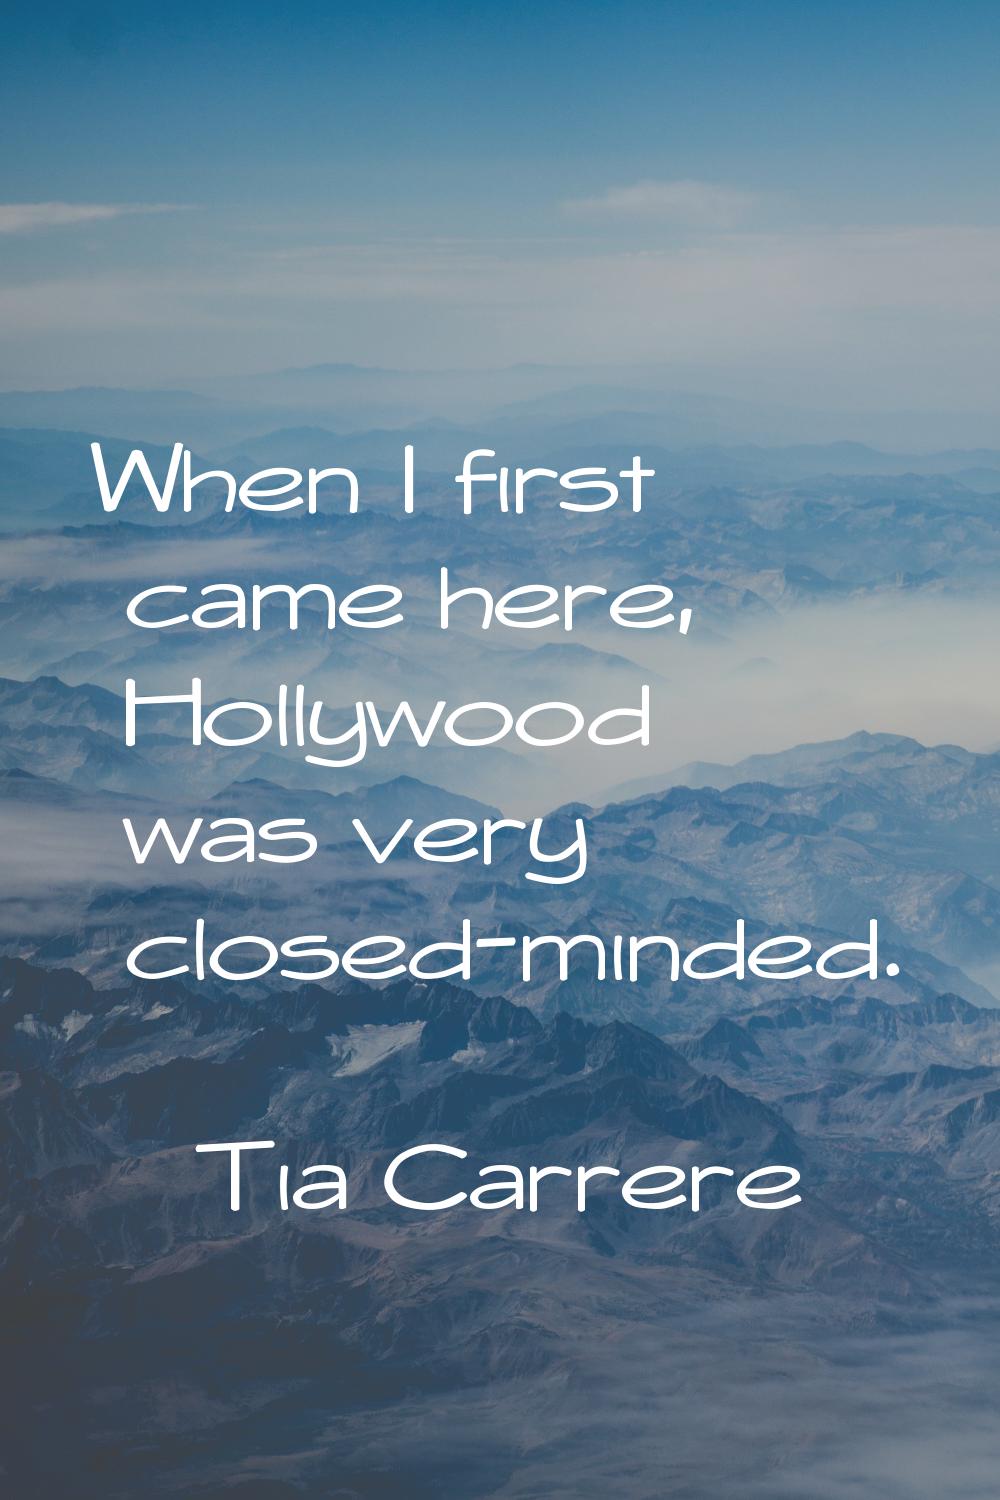 When I first came here, Hollywood was very closed-minded.